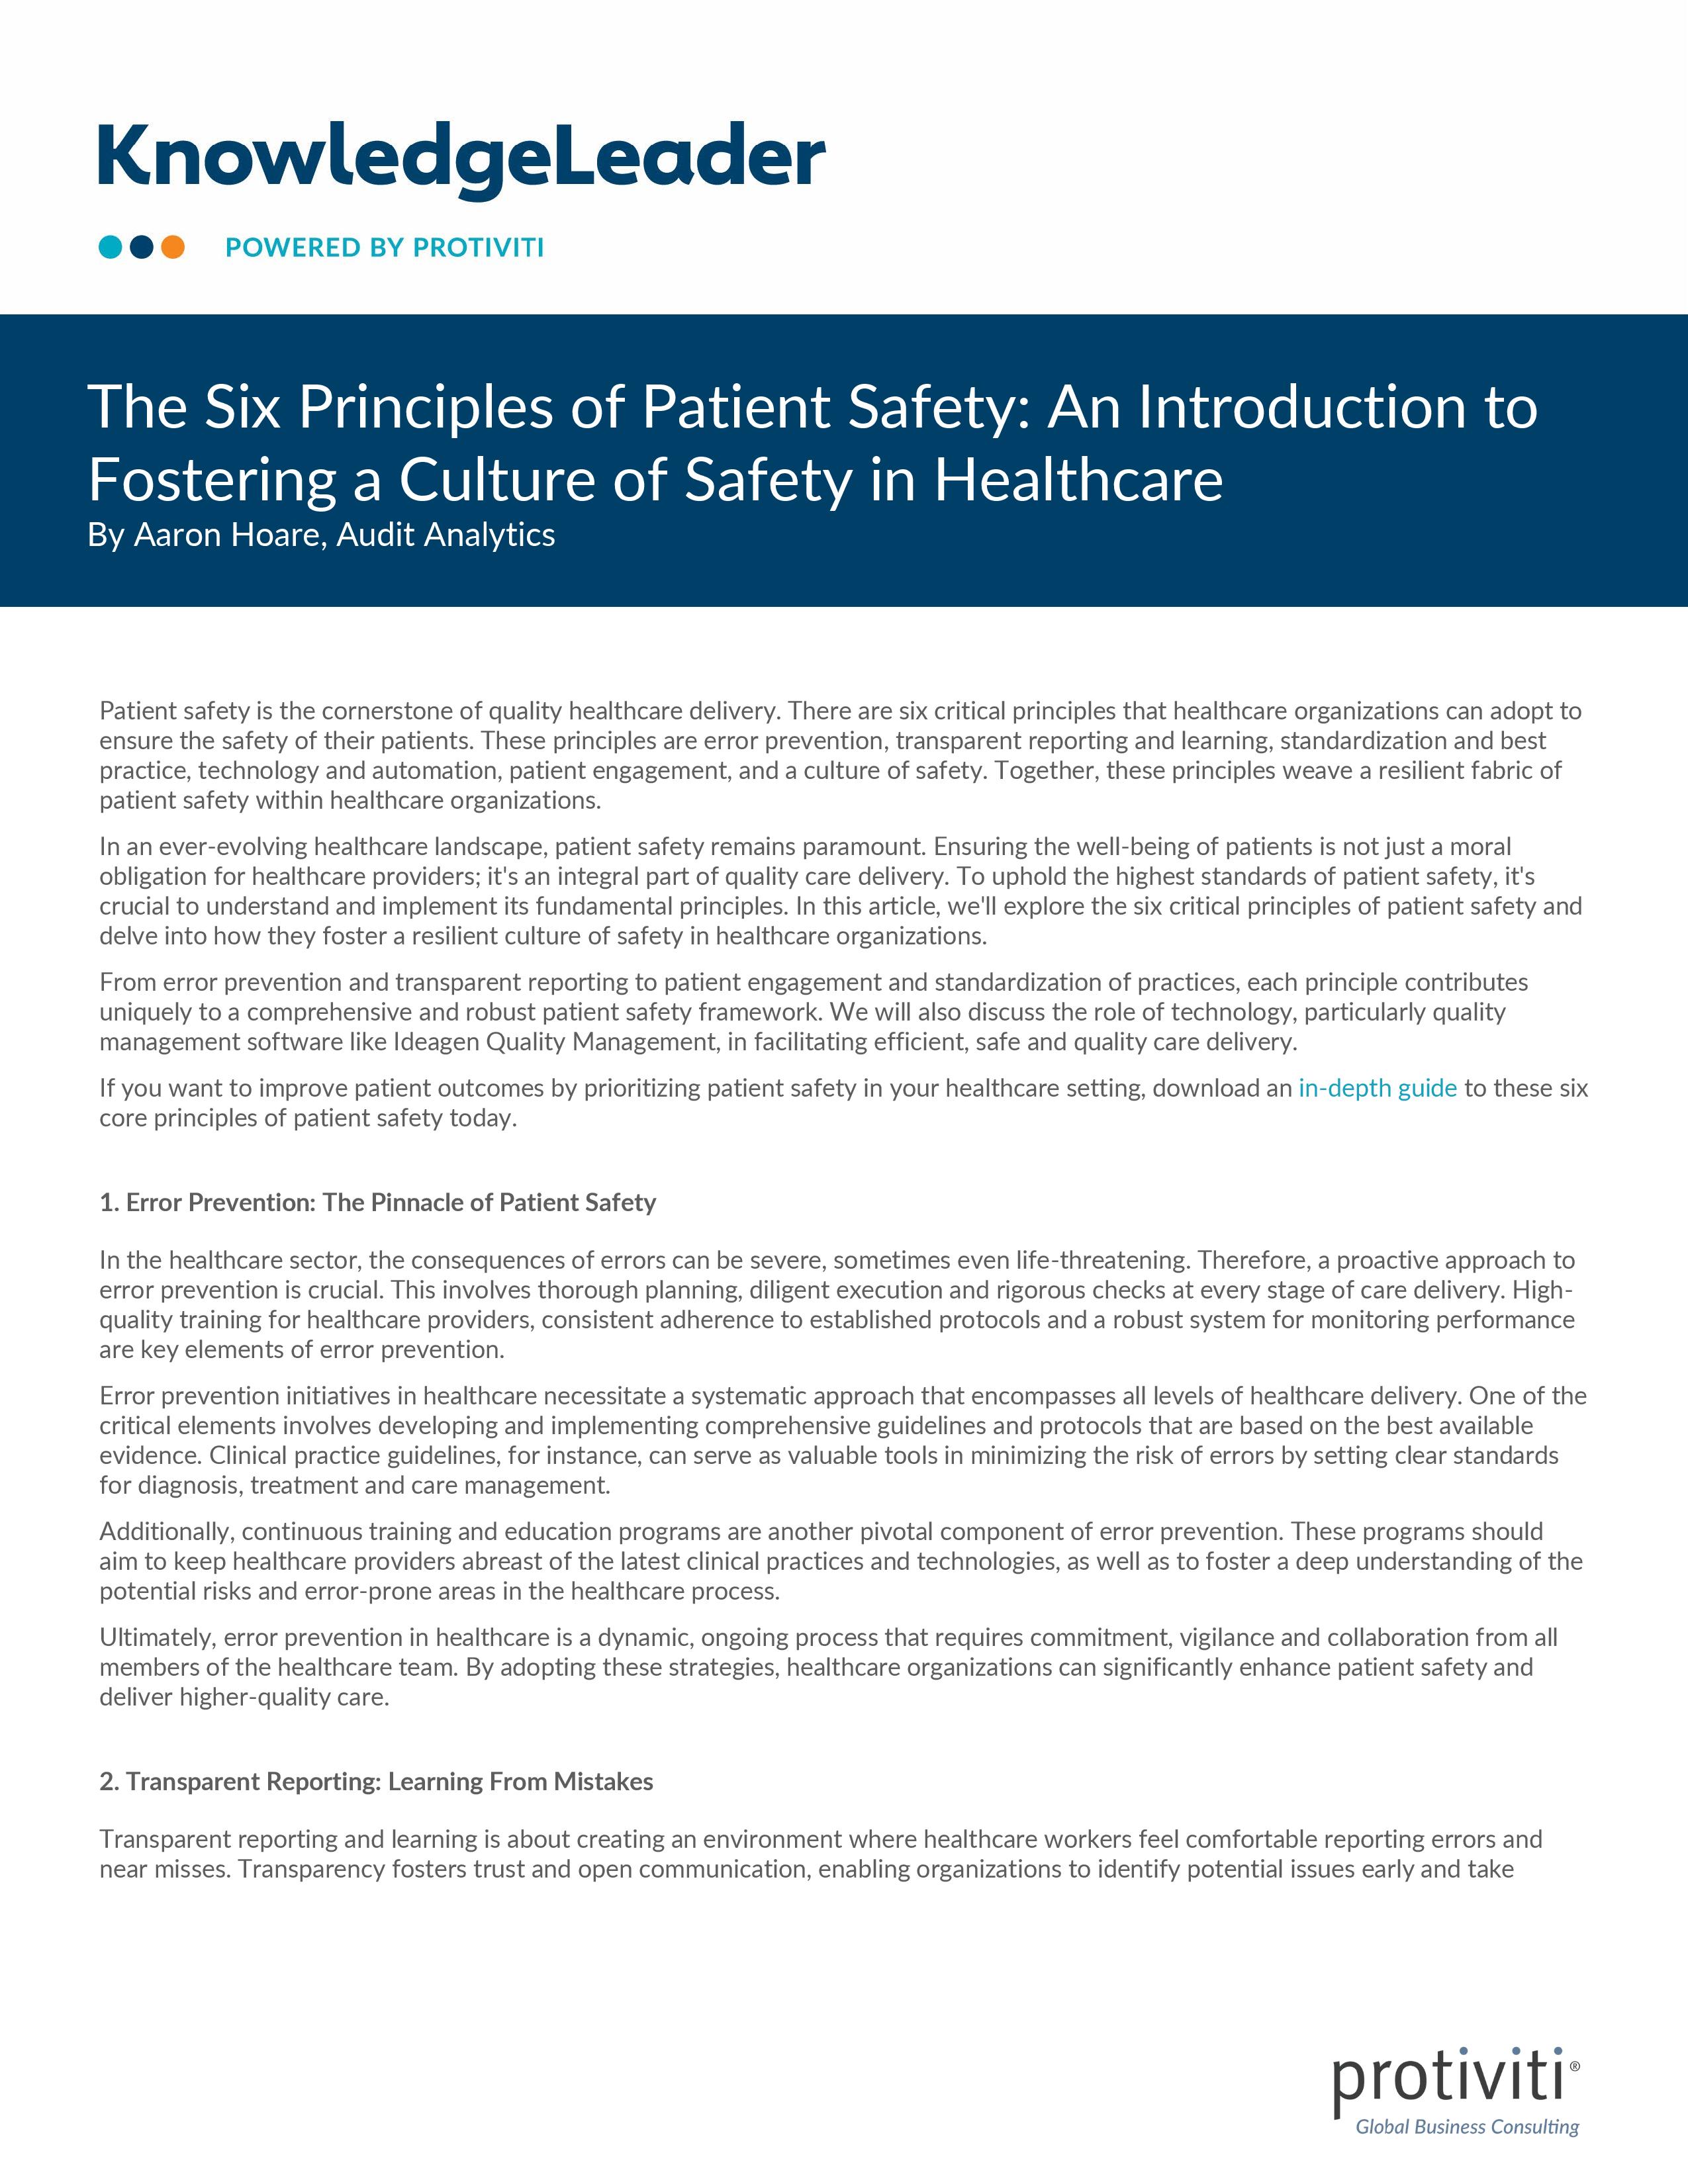 screenshot of the first page of The Six Principles of Patient Safety An Introduction to Fostering a Culture of Safety in Healthcare